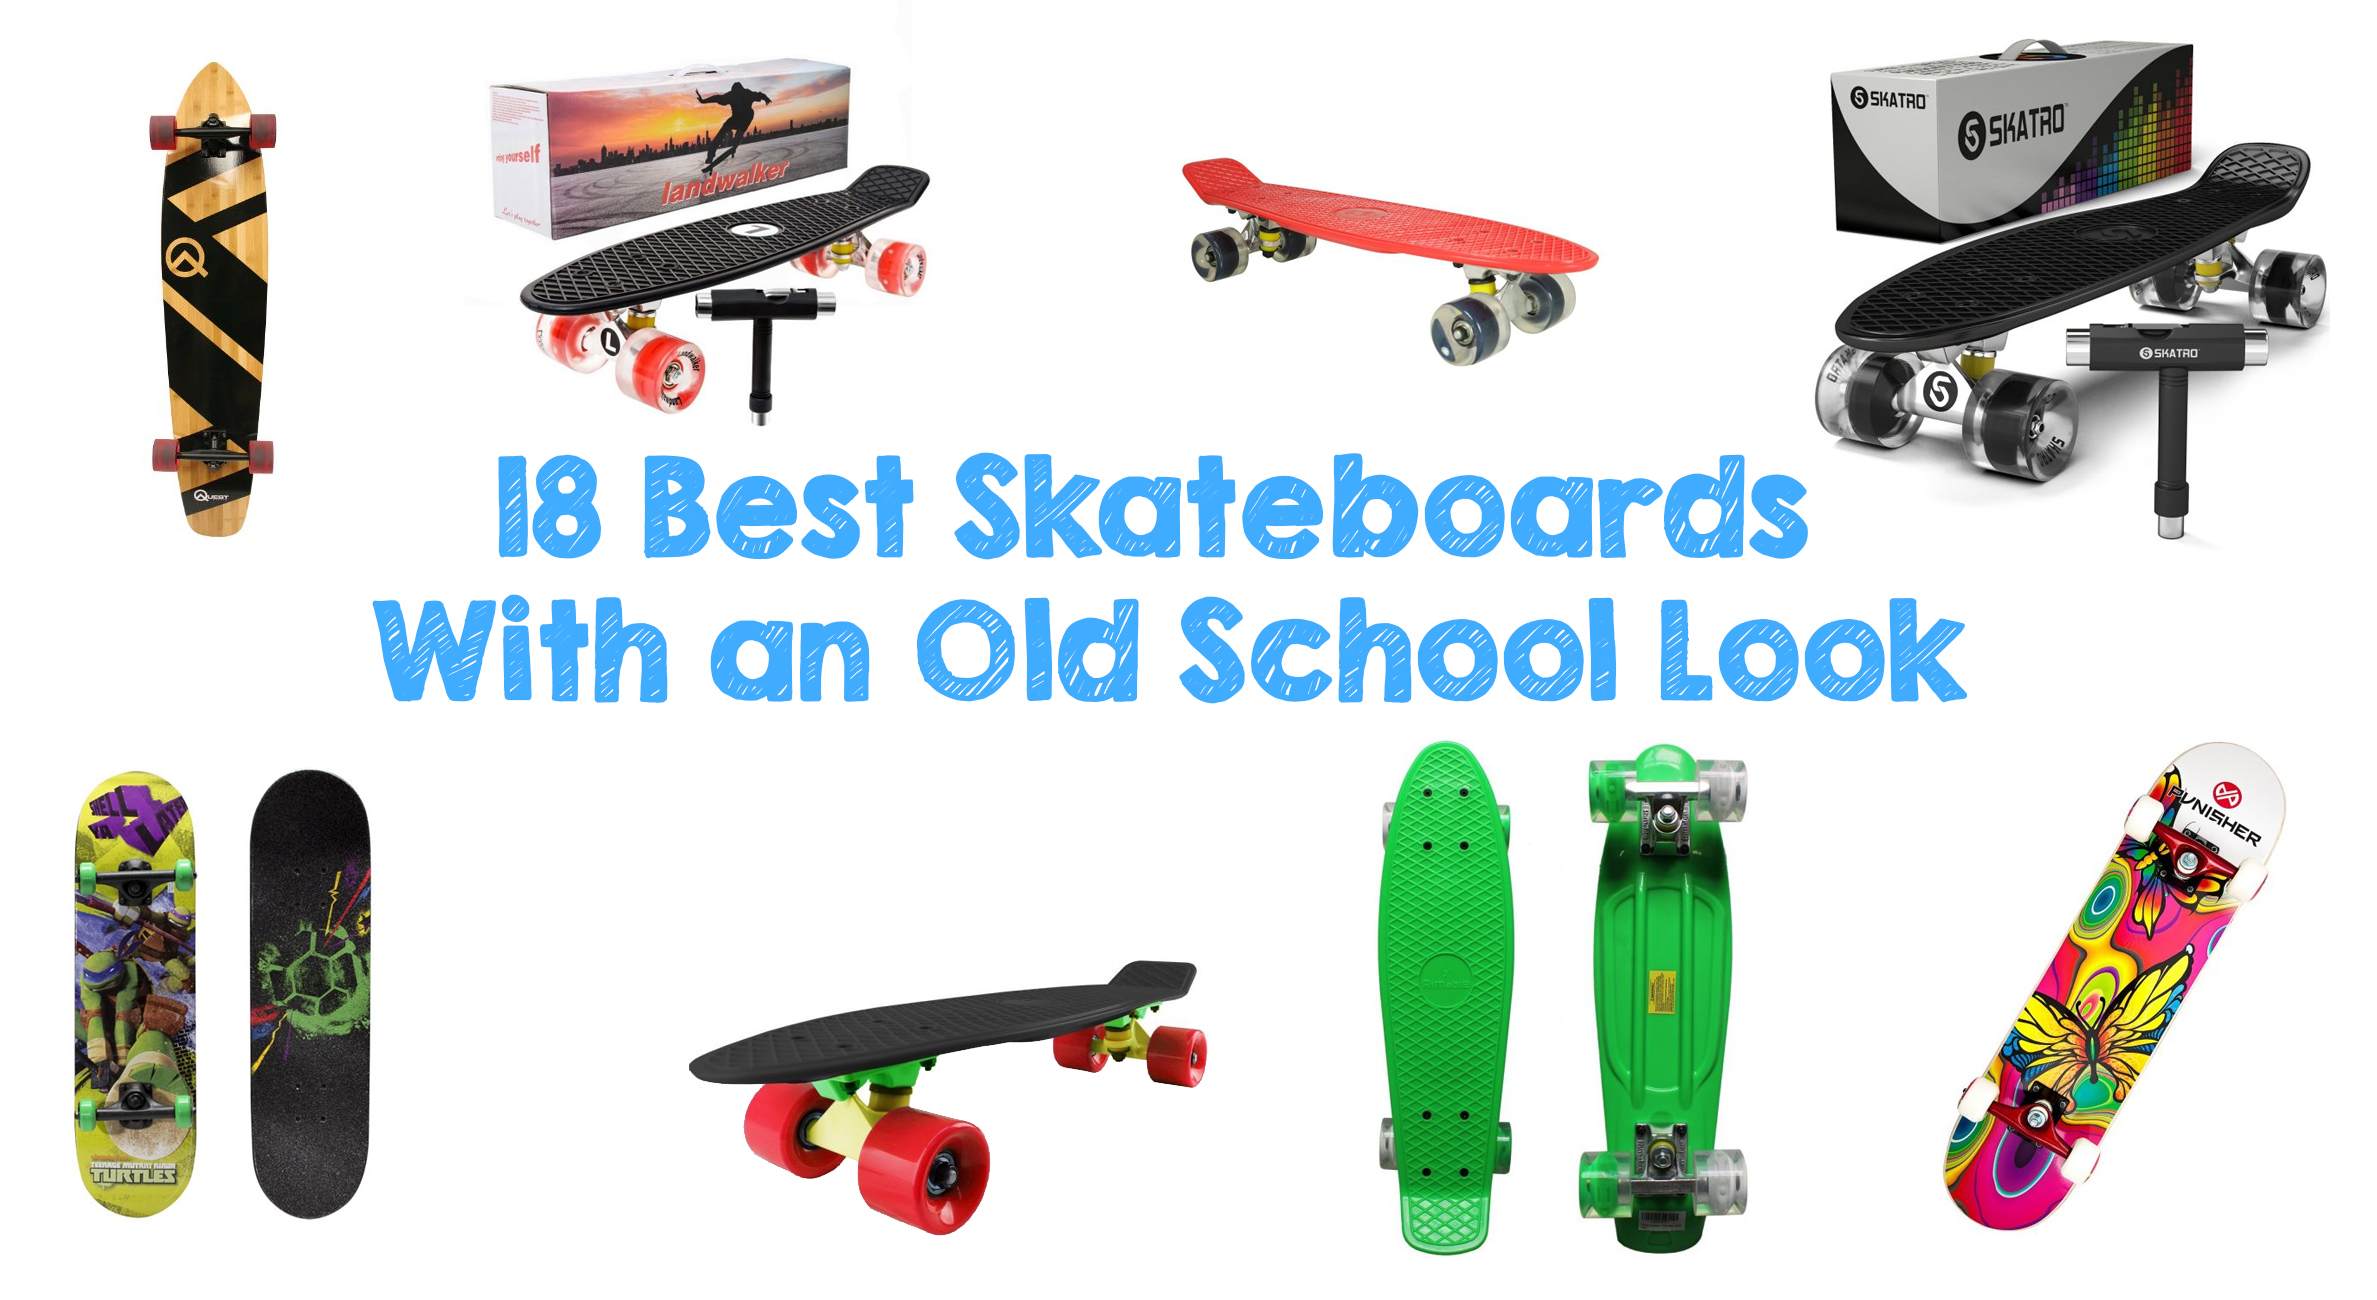 18 Best Skateboards With an Old School Look